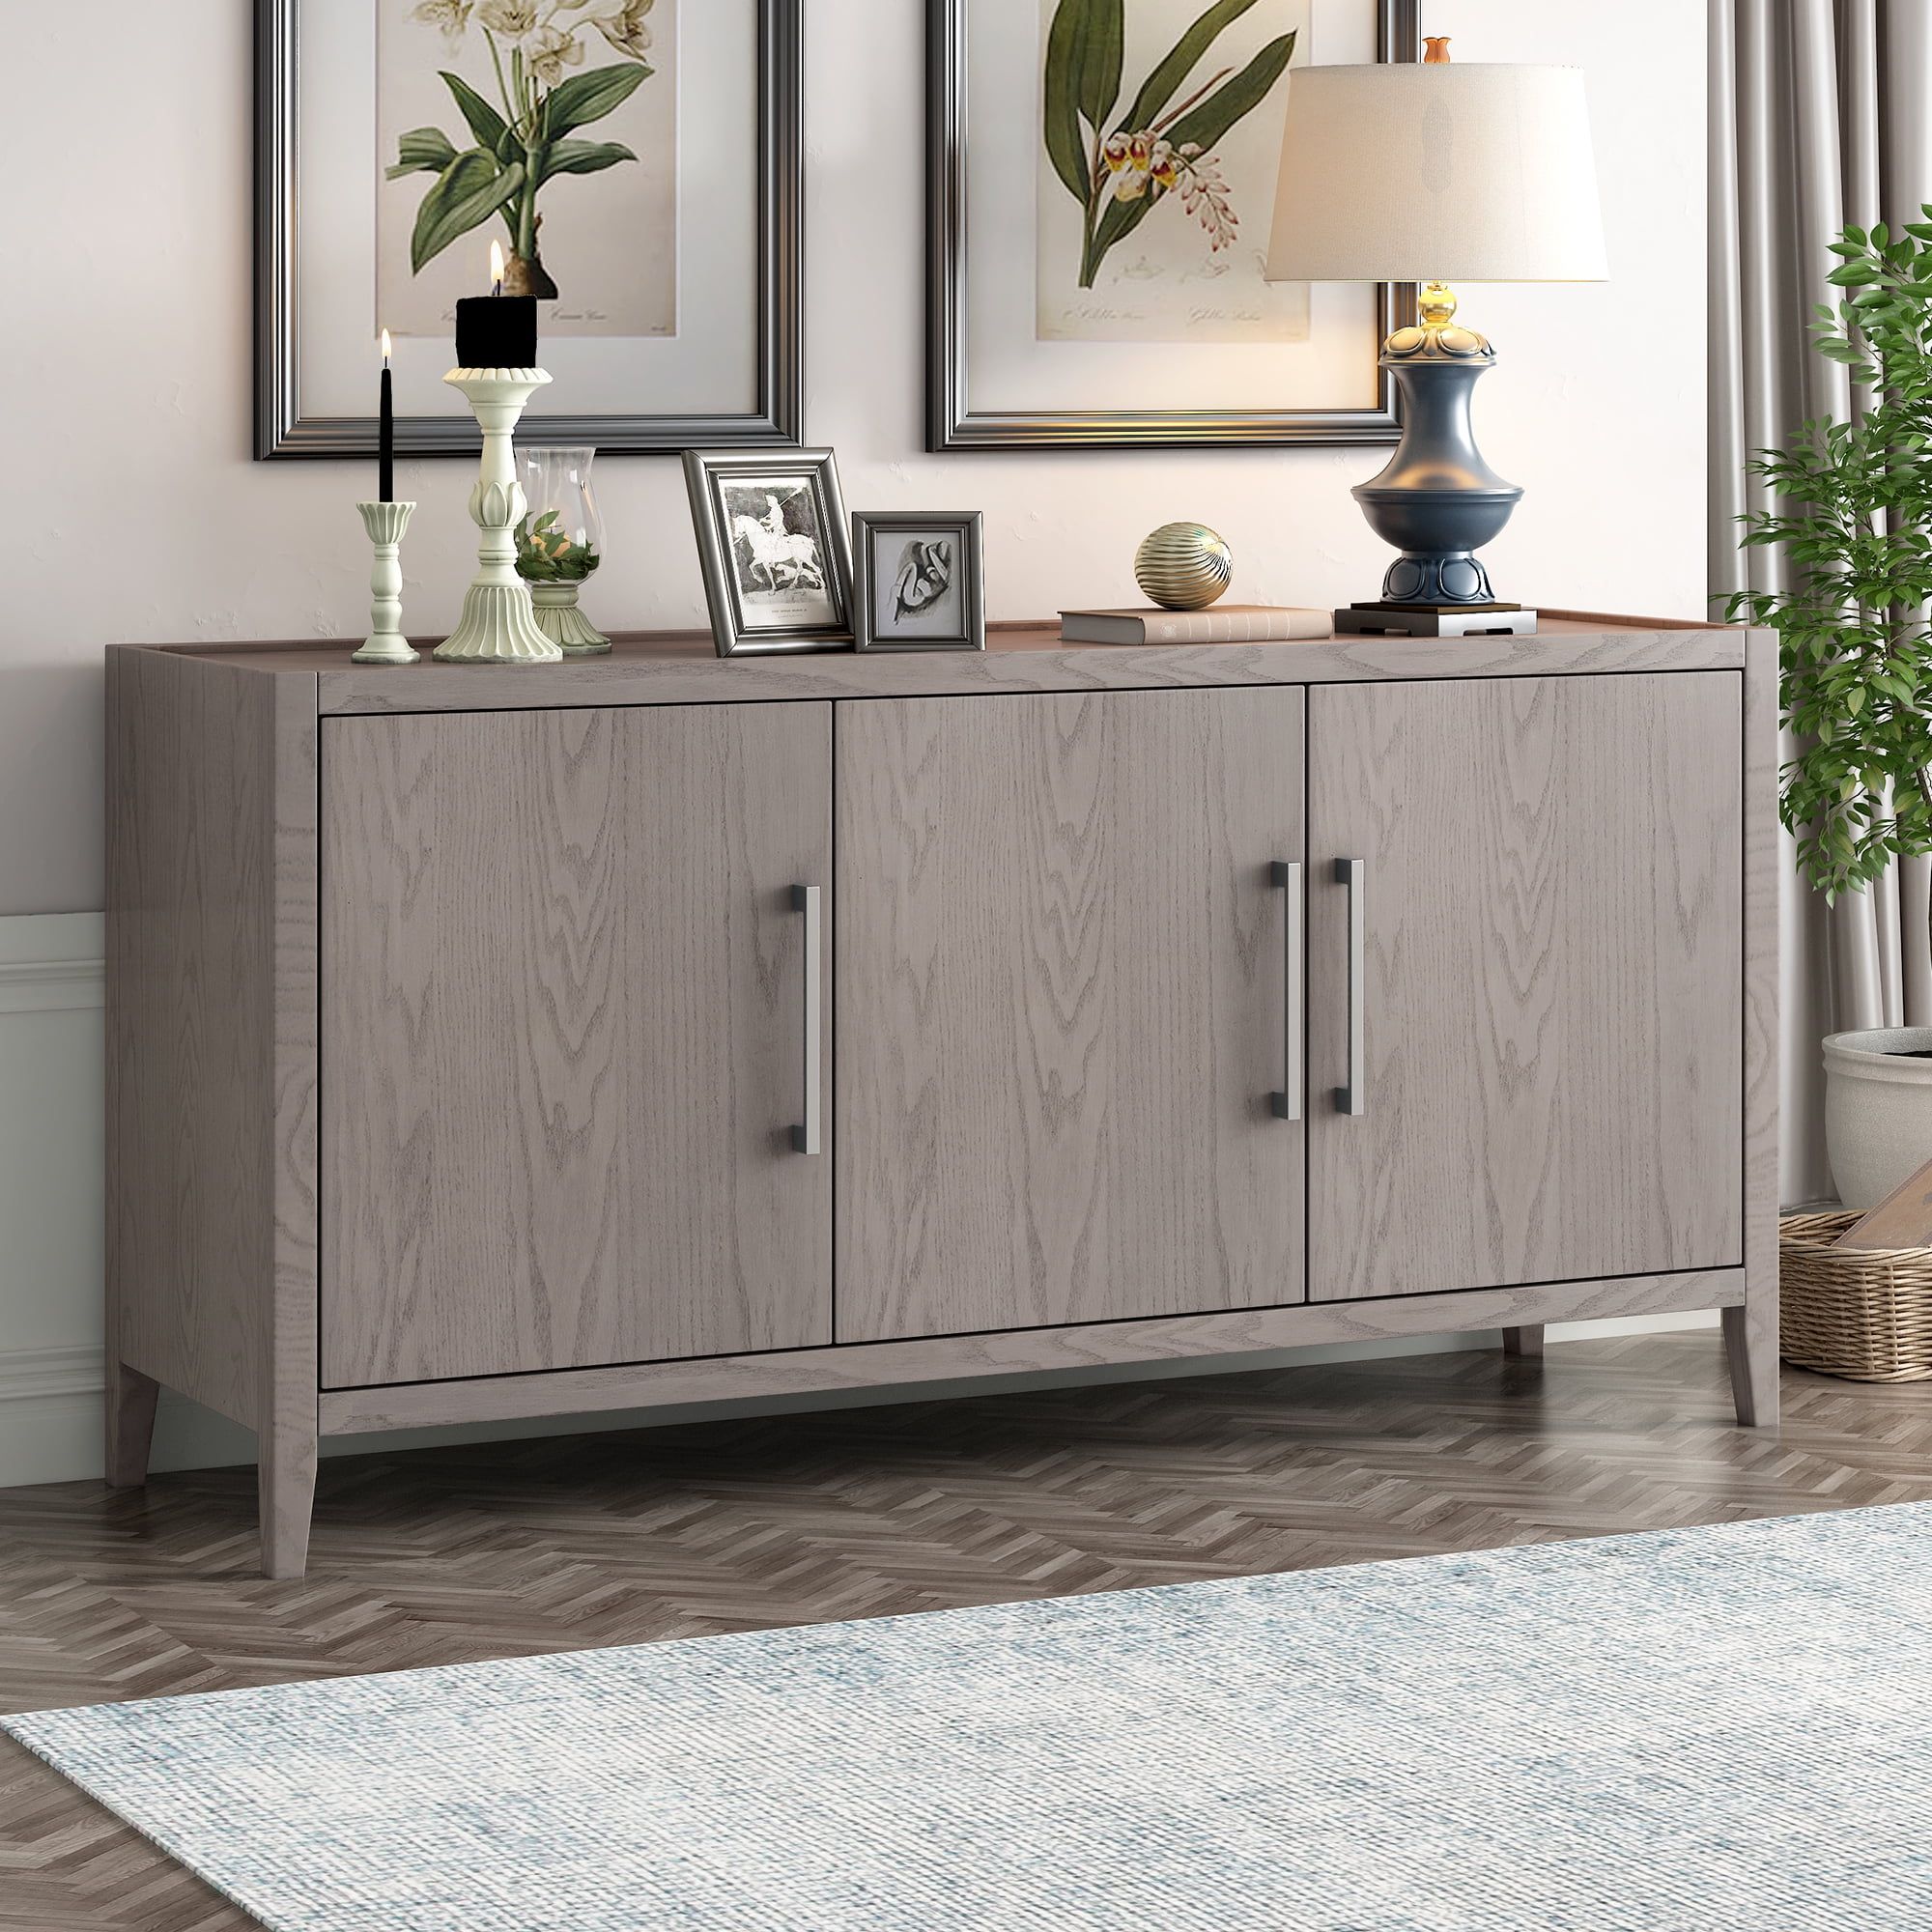 Beige Storage Cabinet, Sideboard Cabinet Furniture, Accent Storage Cabinet  With 3 Doors And Adjustable Shelves, Retro Wood Buffet Sideboard, Kamida Storage  Cabinet For Kitchen Dining Room Living Room – Walmart Within 3 Door Accent Cabinet Sideboards (View 4 of 15)